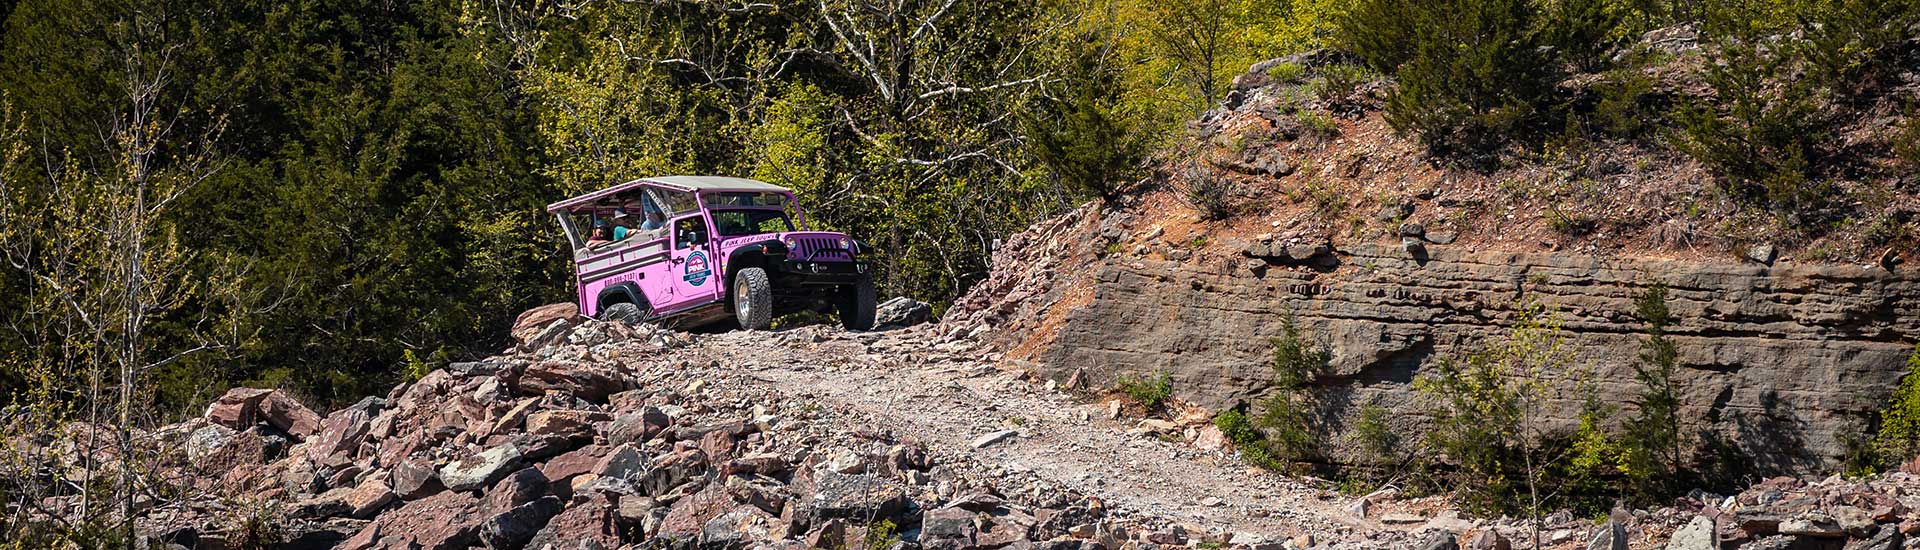 Header image of a Pink Jeep Wrangler approaching the top of a rocky 4x4 trail with trees in background, Branson, Missouri.